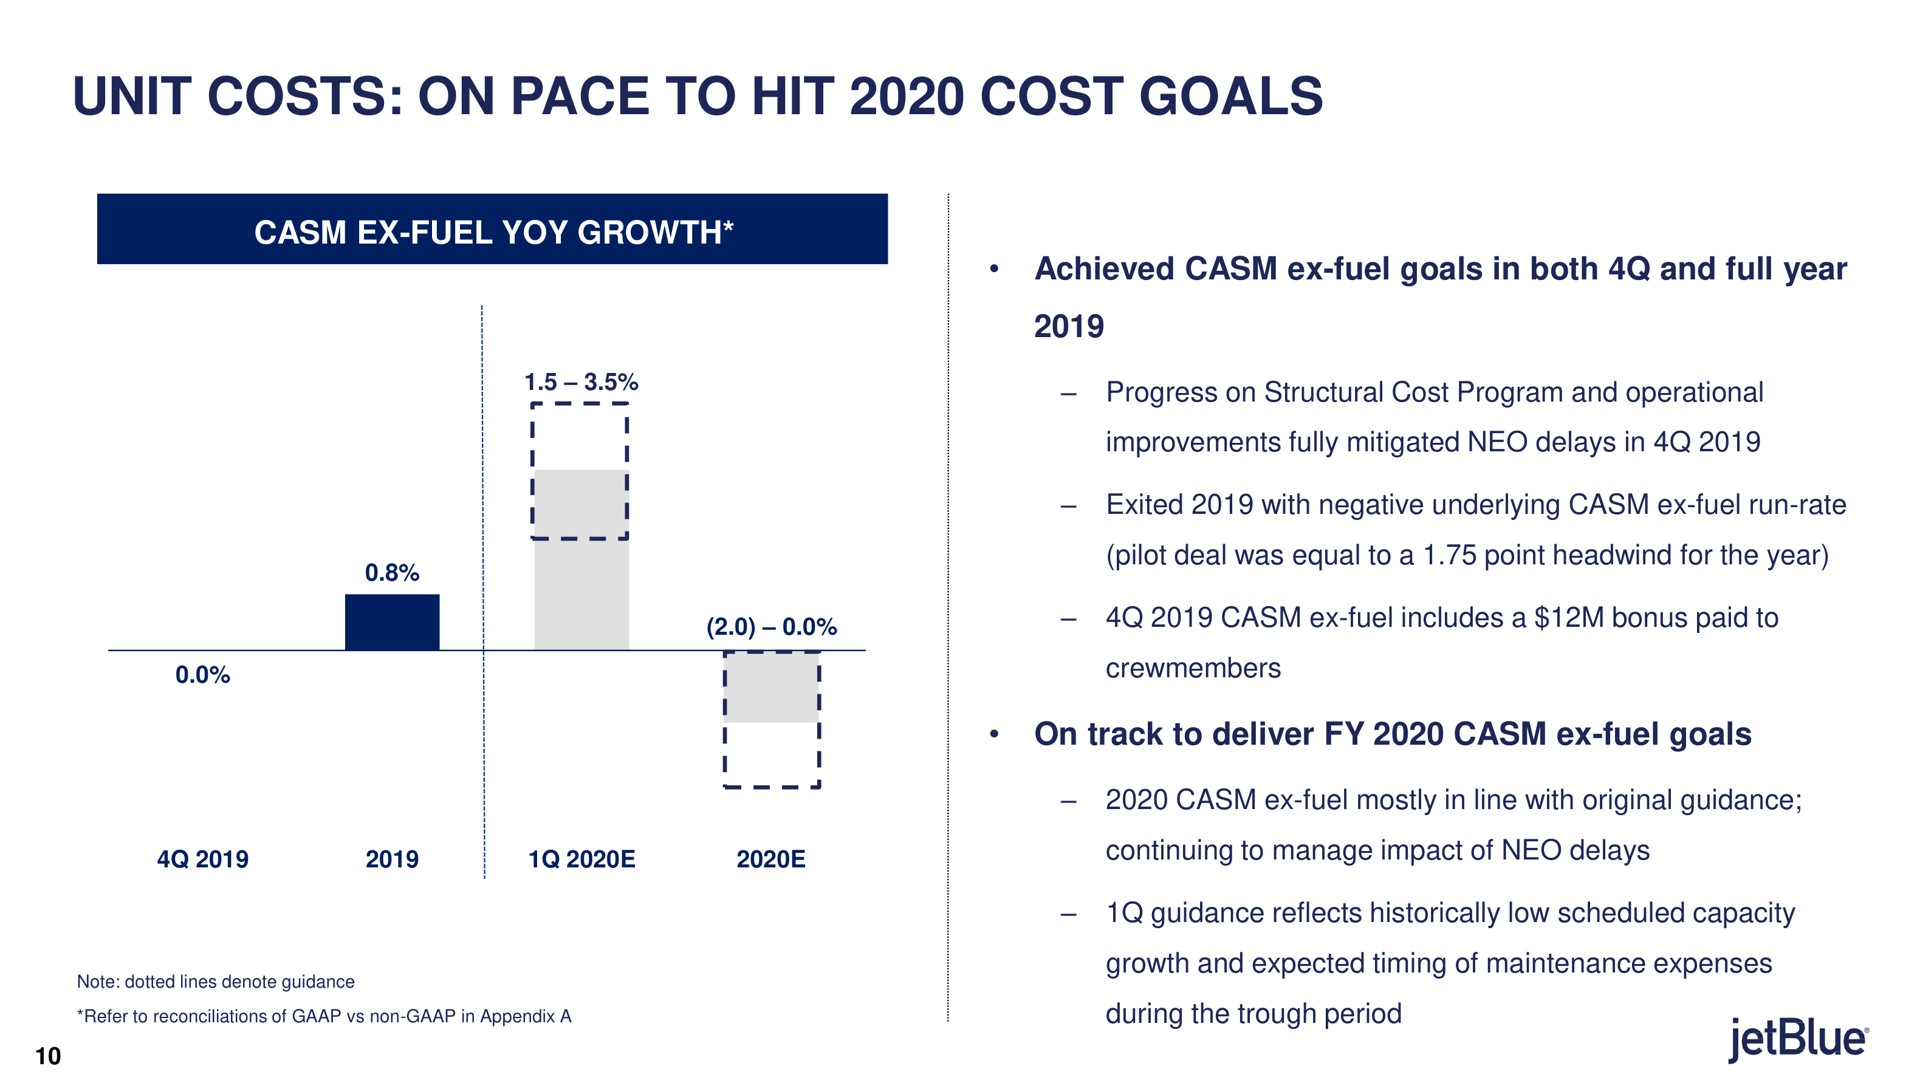 unit costs on pace to hit cost goals fuel yoy growth achieved fuel goals in both and full year on track to deliver fuel goals | jetBlue